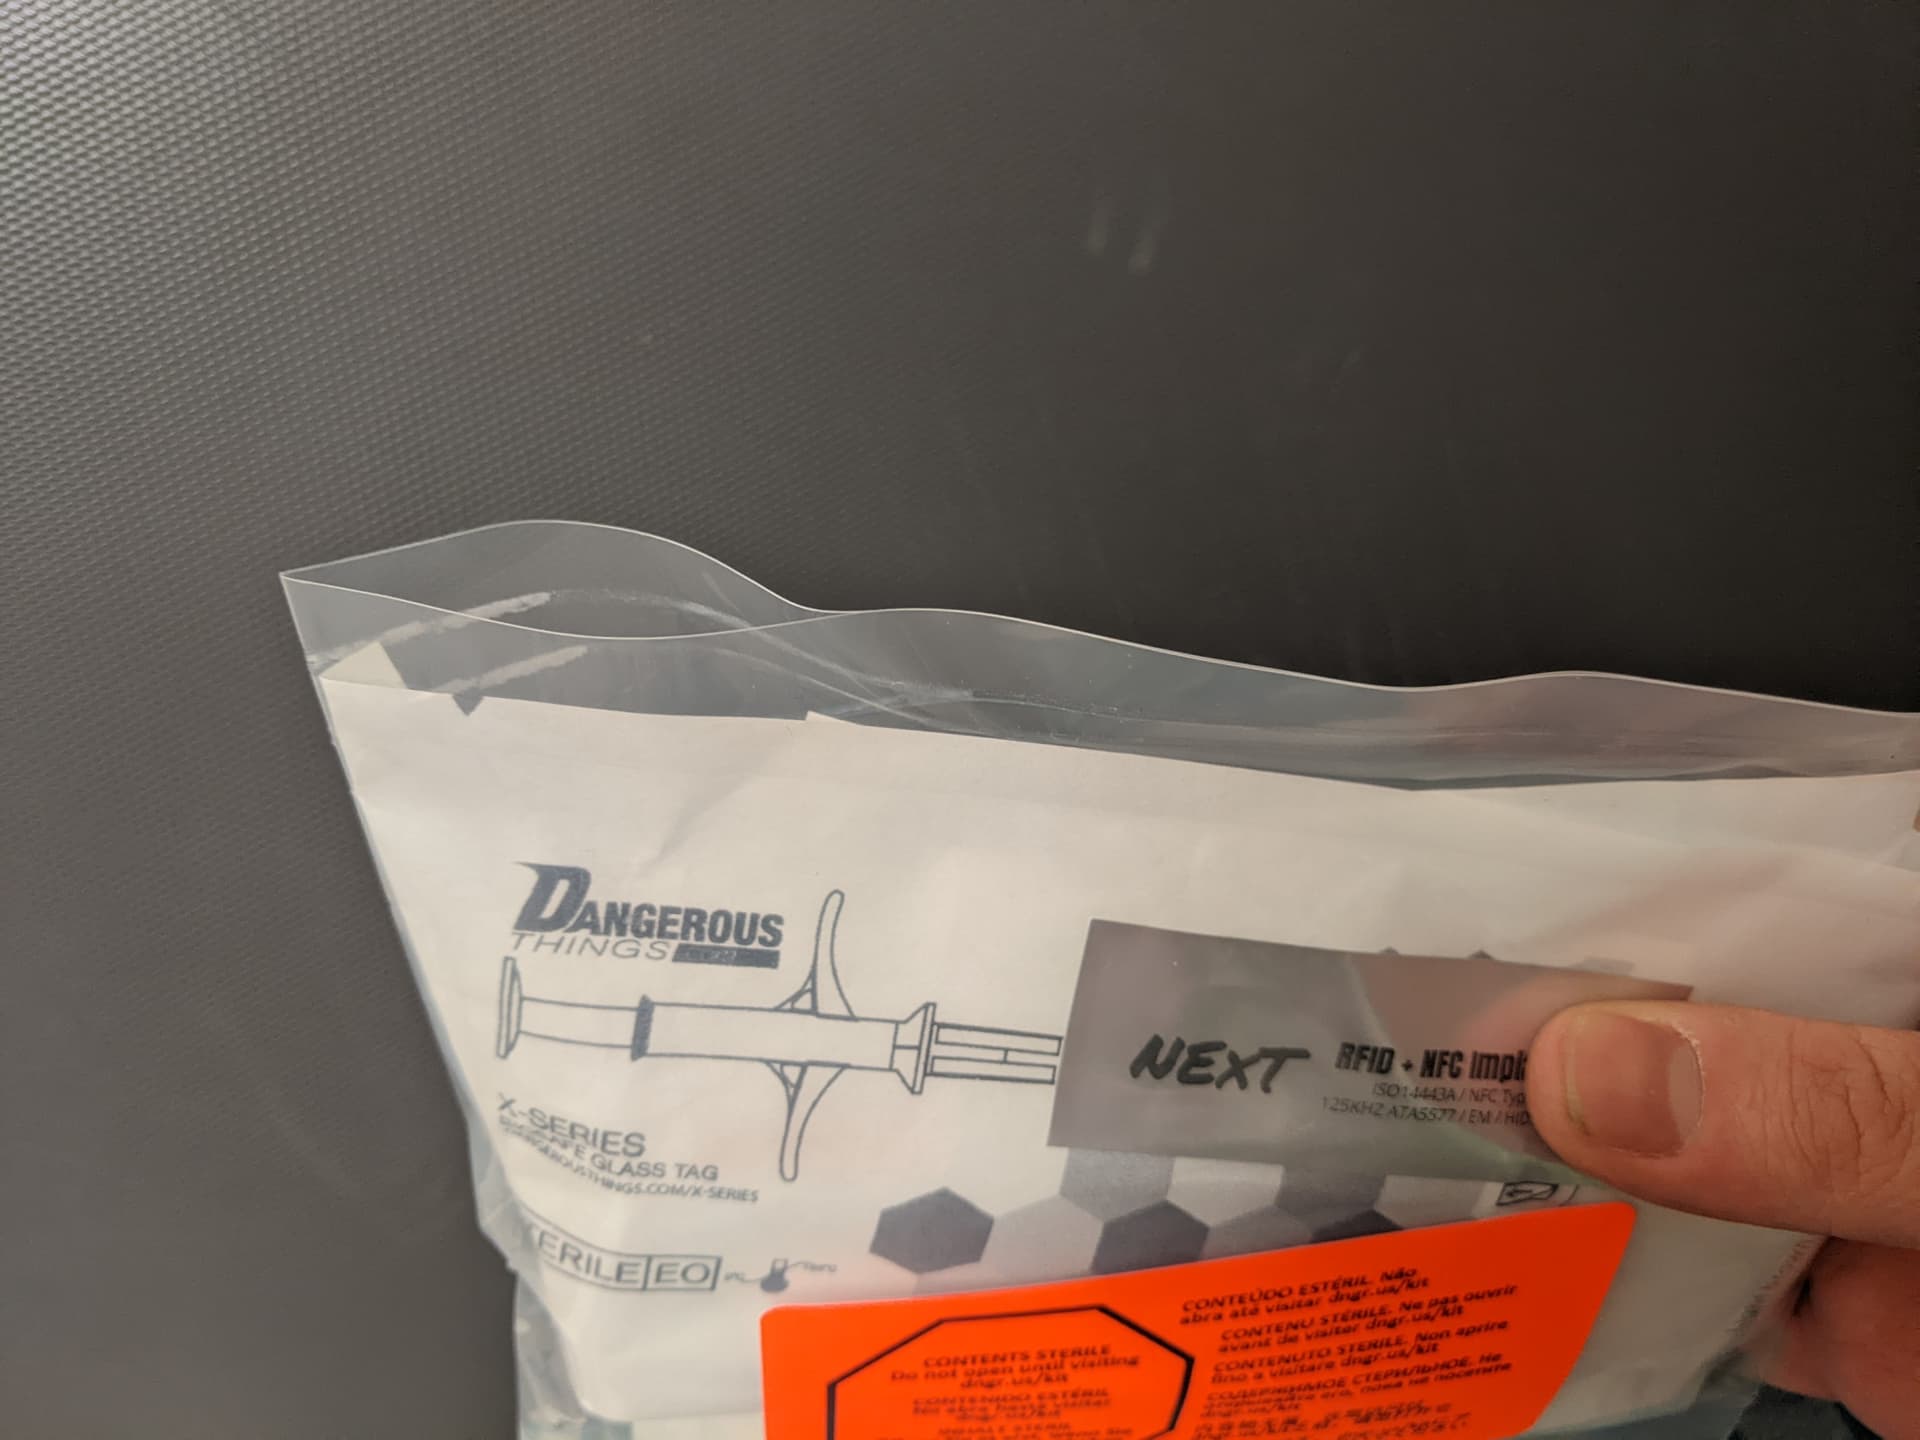 Implant shipment arrived with poly bag not sealed. Still Safe? - Support -  Dangerous Things Forum